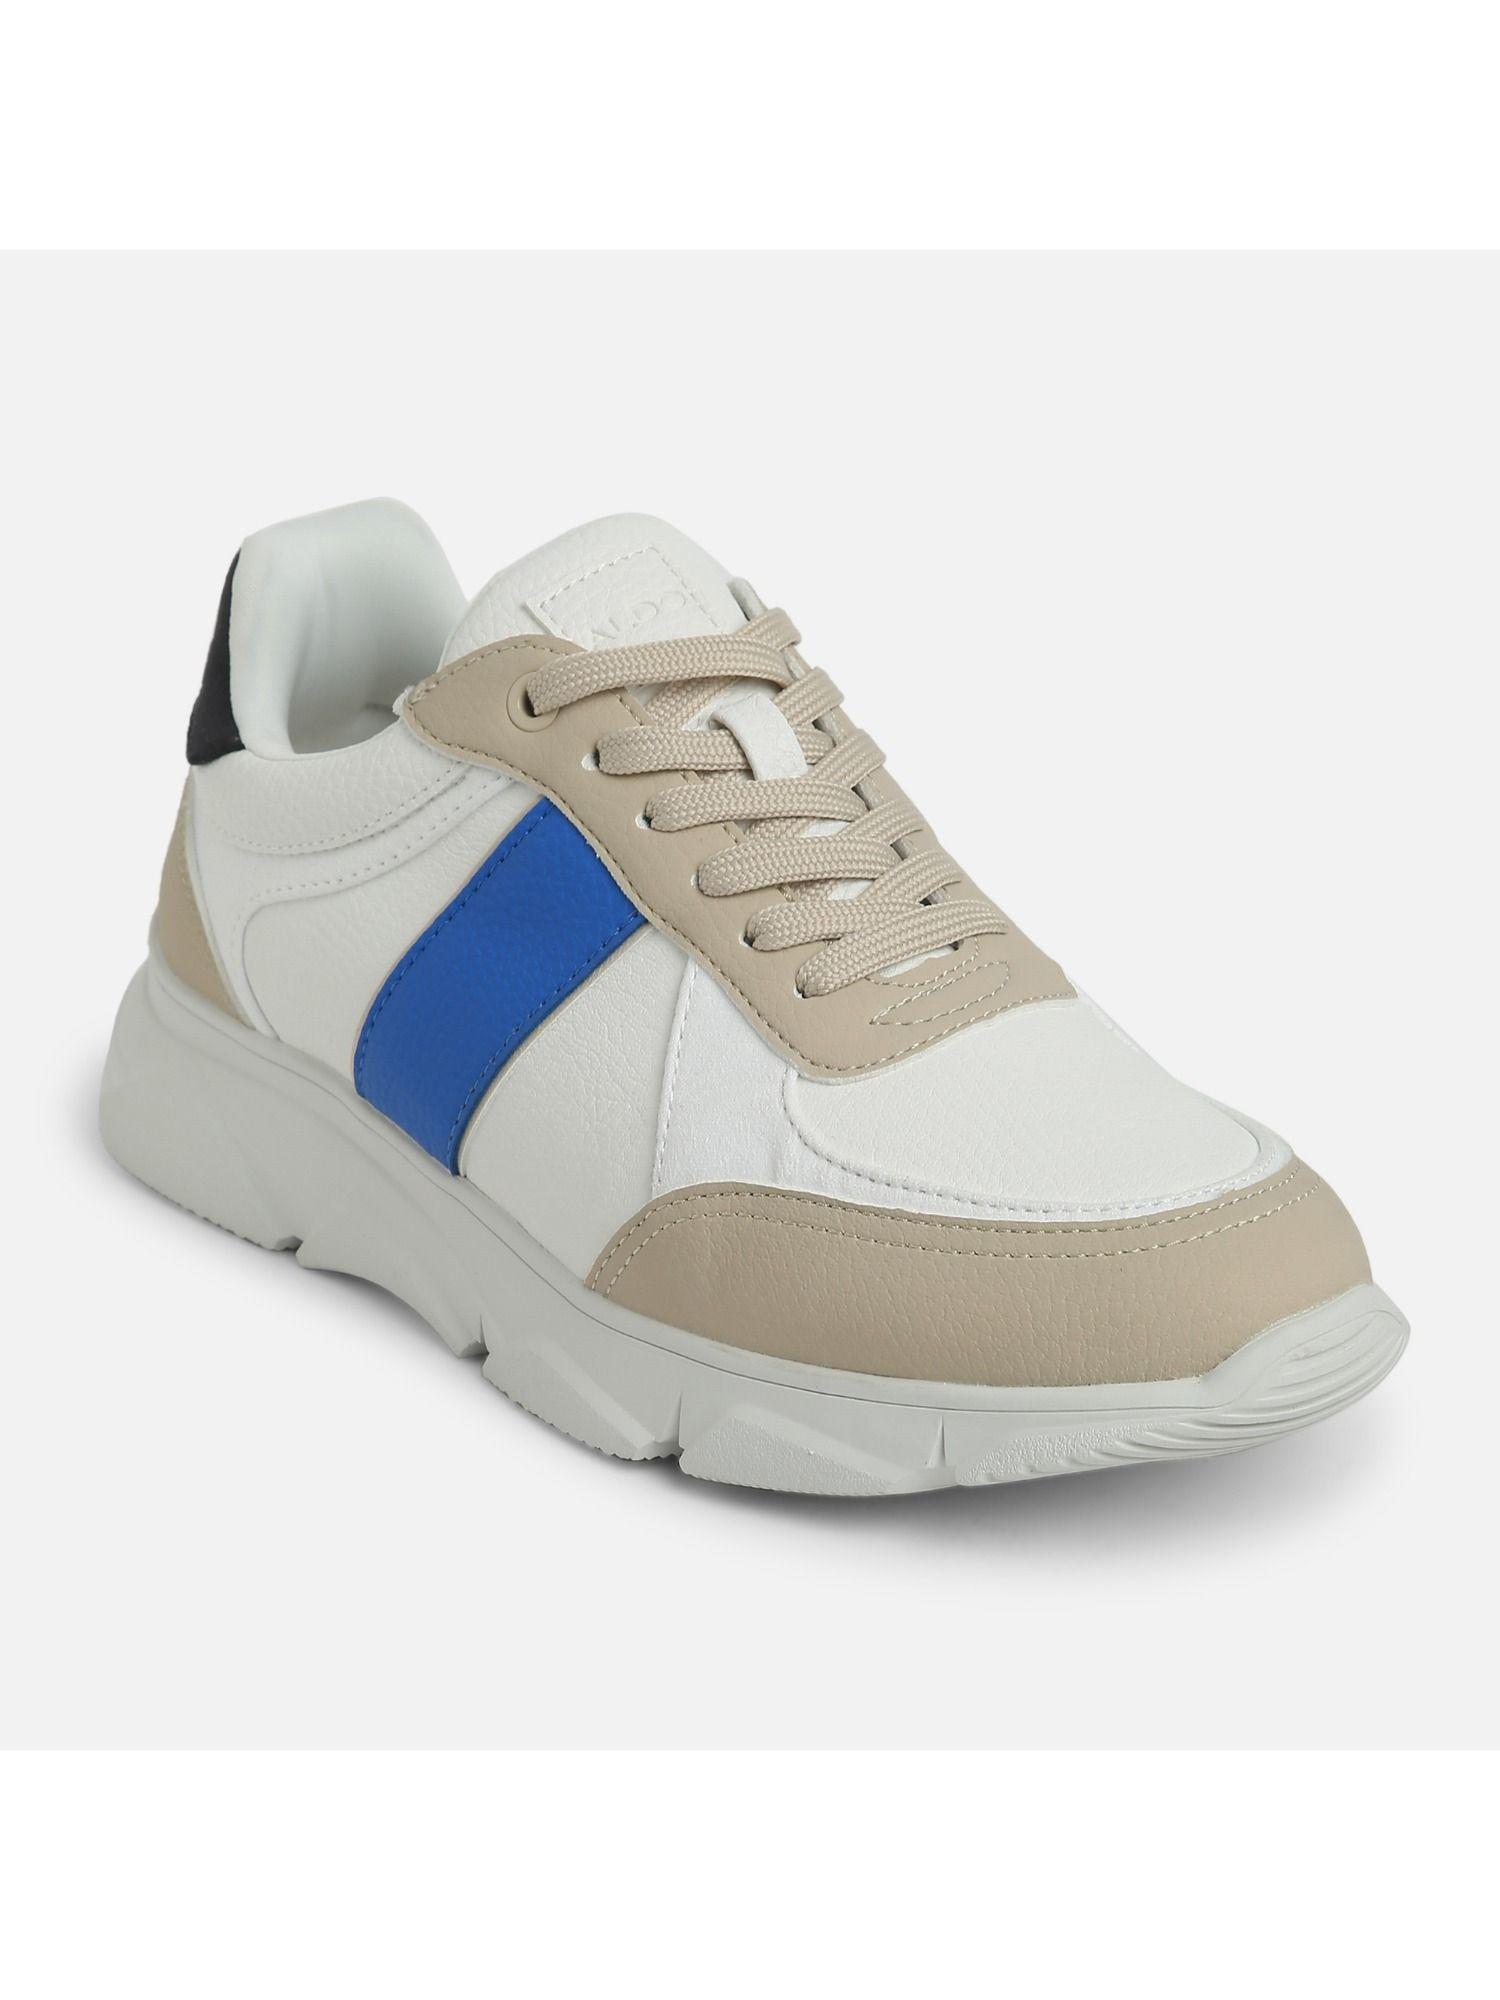 murvaise synthetic white-navy colorblock sneakers